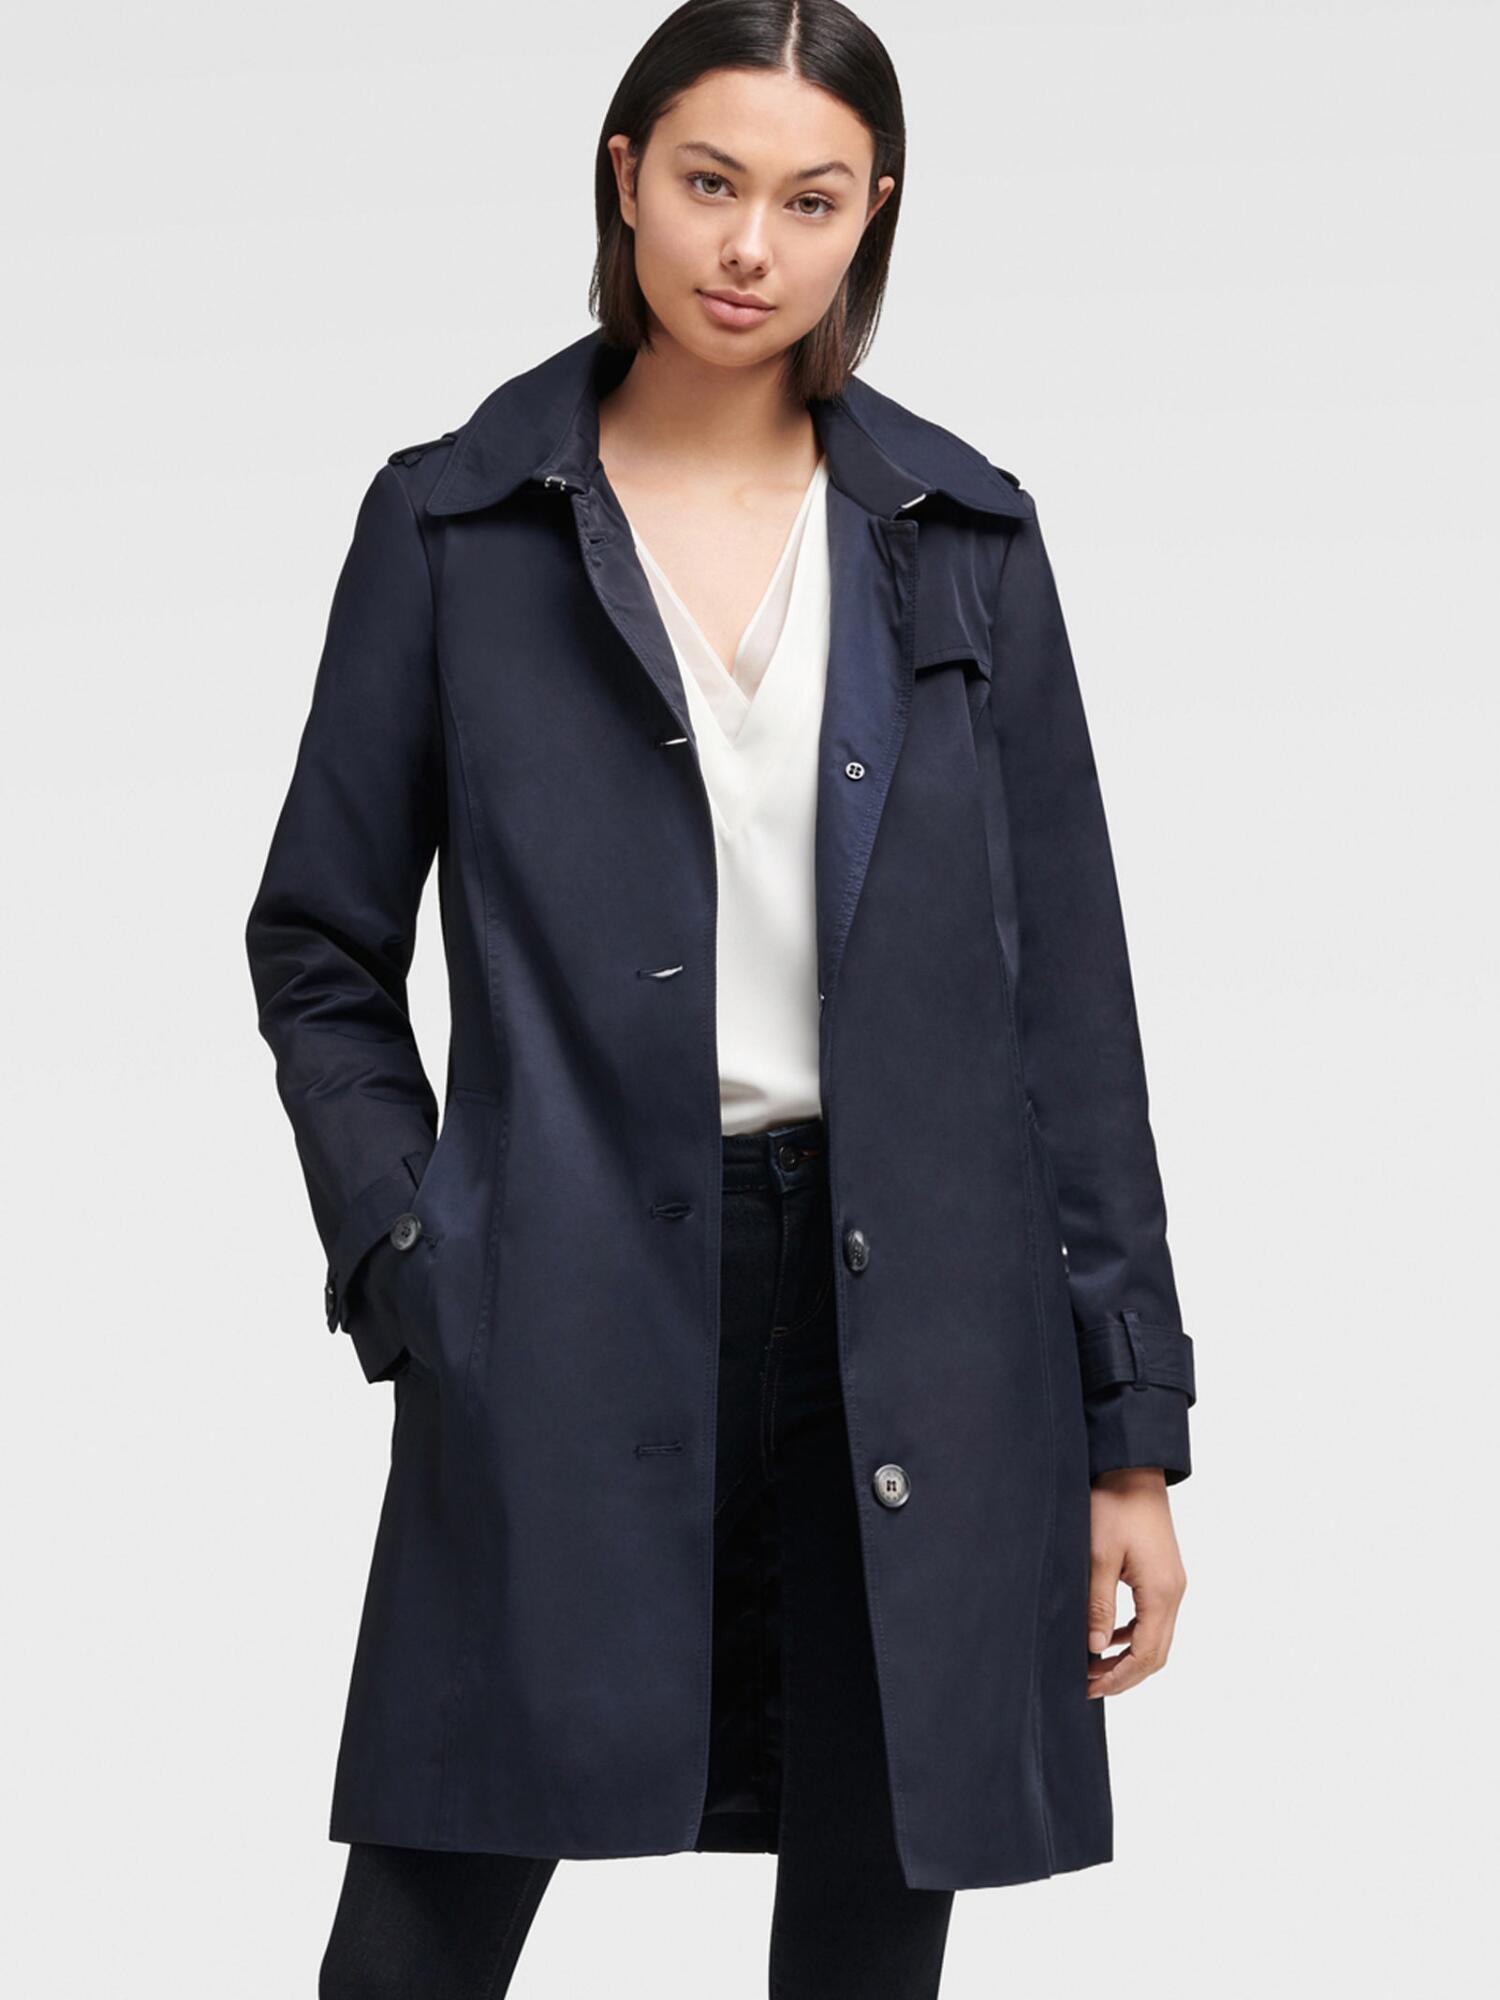 DKNY Hooded Trench Coat in Navy (Blue) - Lyst